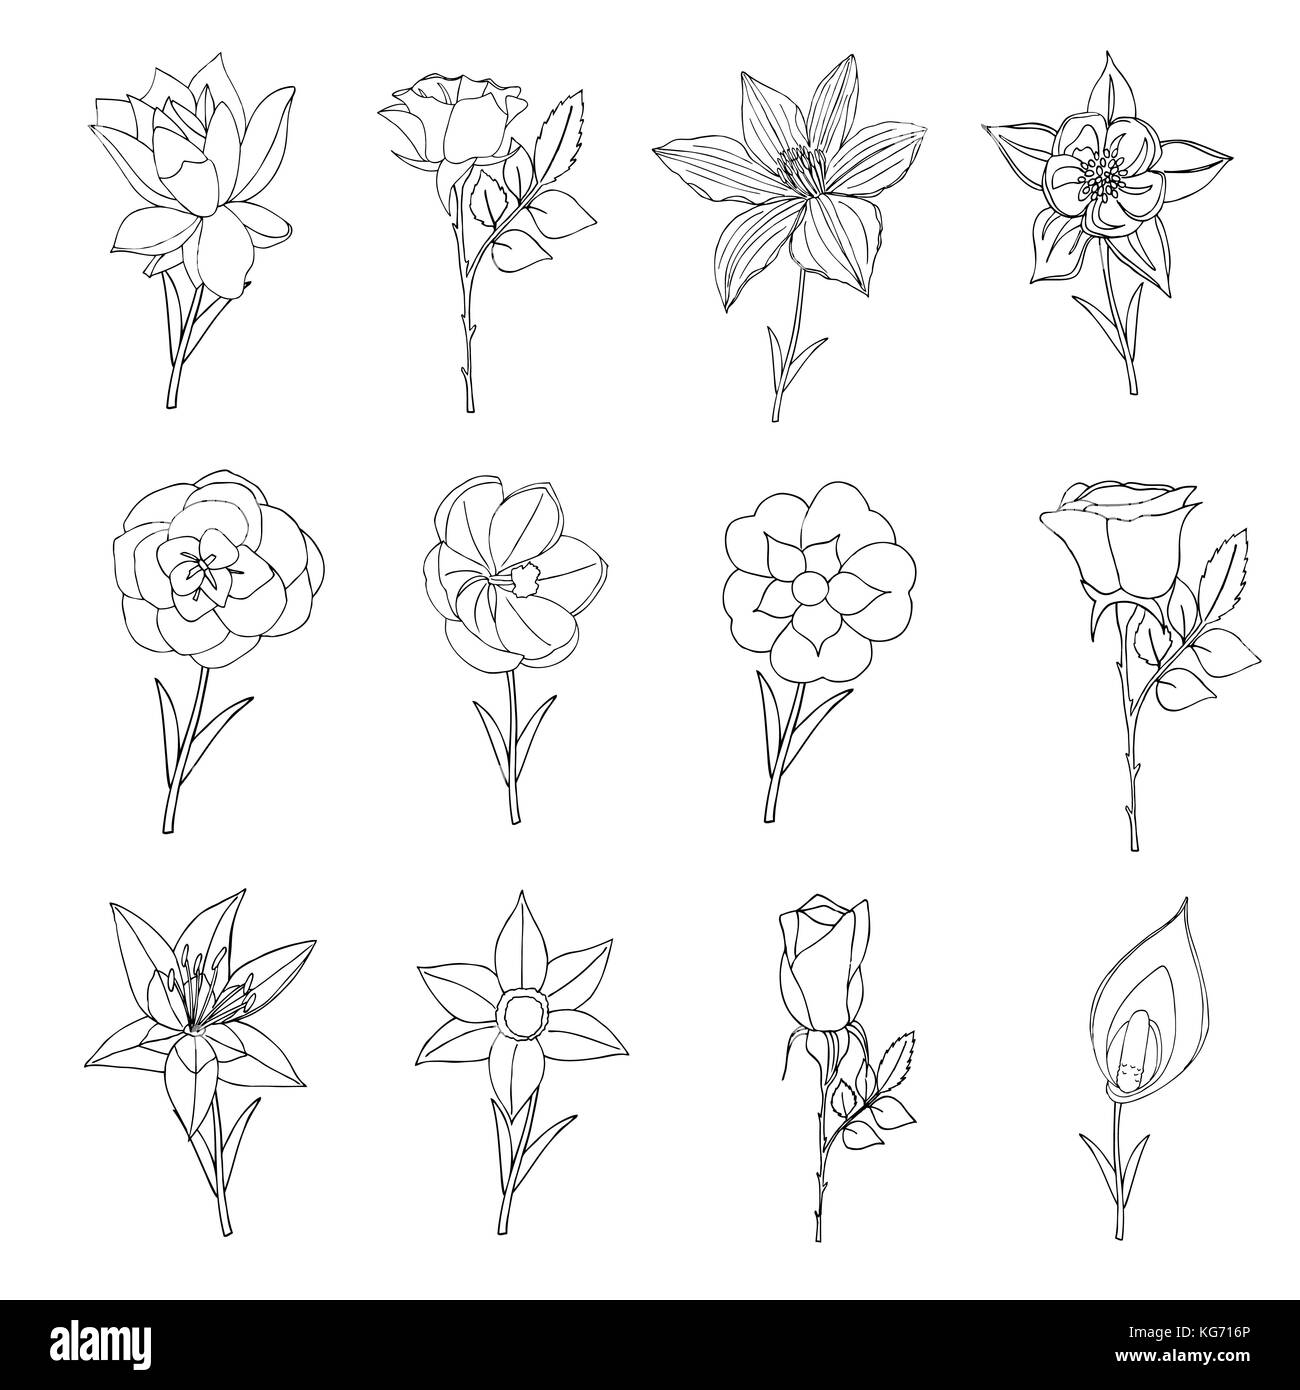 Doodles of Flowers collection. Vector illustration image Stock Vector ...